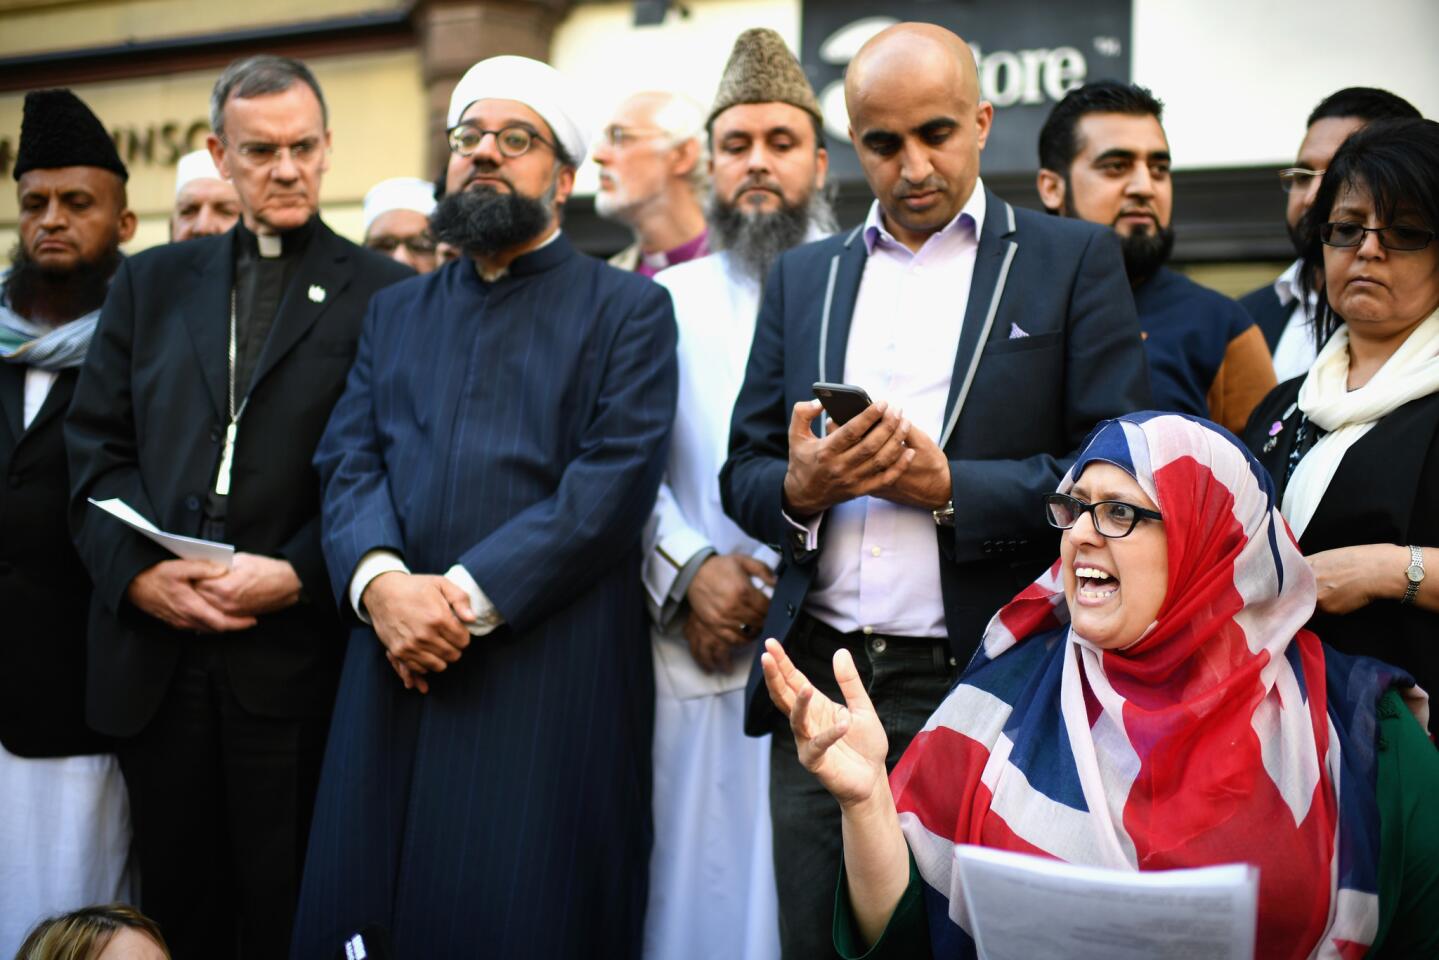 Manchester resident Gulnar Bano Kham Ghadri wears a British flag headscarf during a vigil by multicultural religious leaders in St. Ann's Square on May 24, 2017.